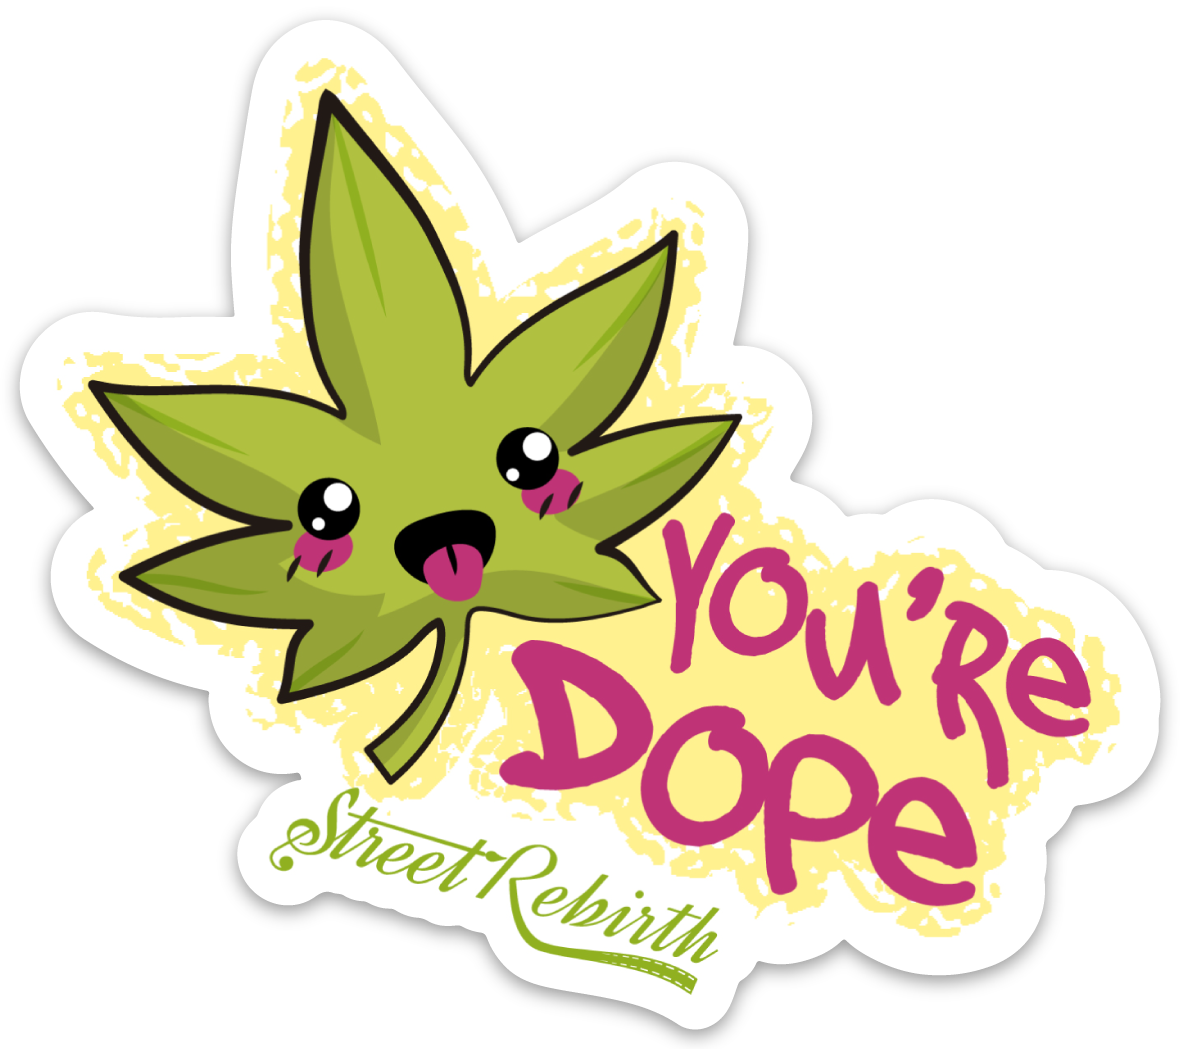 You're Dope PUN STICKER – ONE 4 INCH WATER PROOF VINYL STICKER – FOR HYDRO FLASK, SKATEBOARD, LAPTOP, PLANNER, CAR, COLLECTING, GIFTING